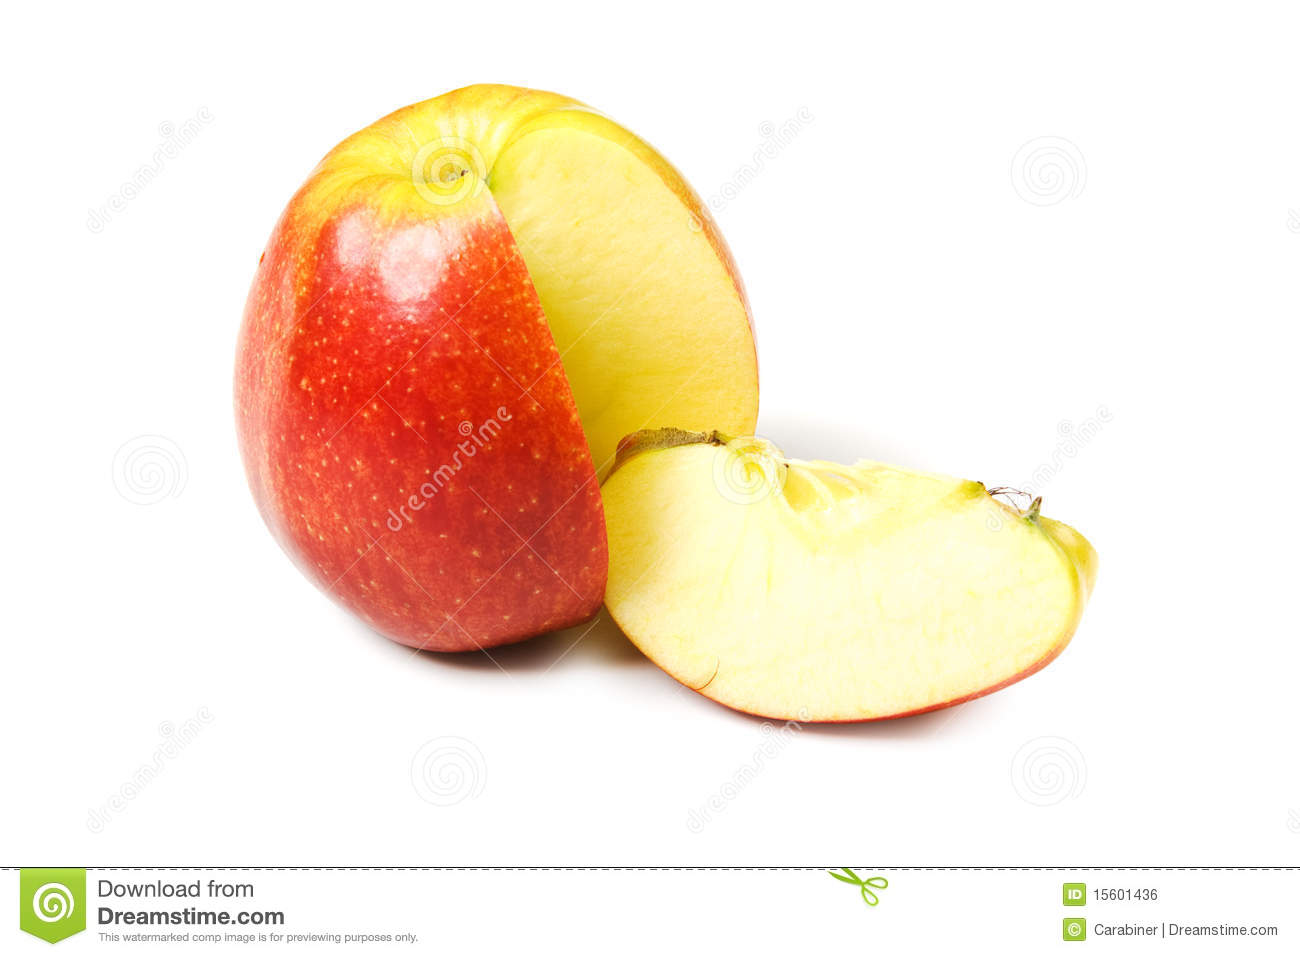 Apple Slices Royalty Free Stock Image   Image  15601436